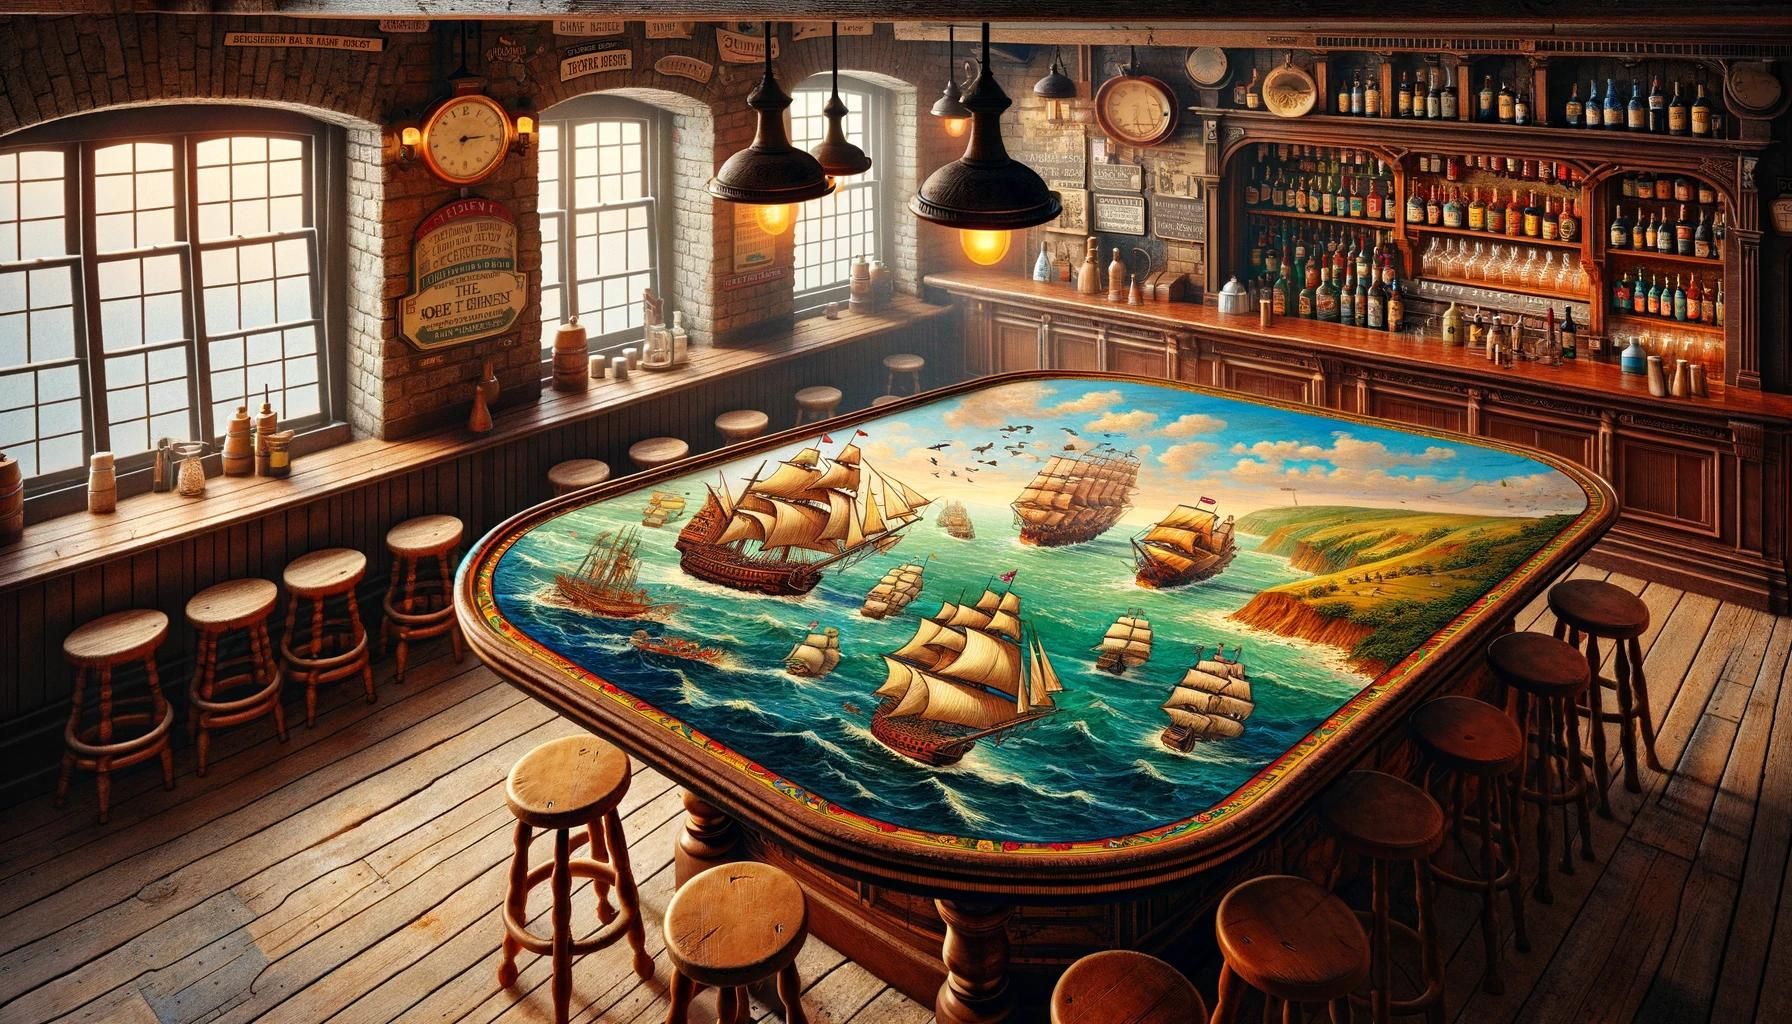 A bar table with a ship model on it